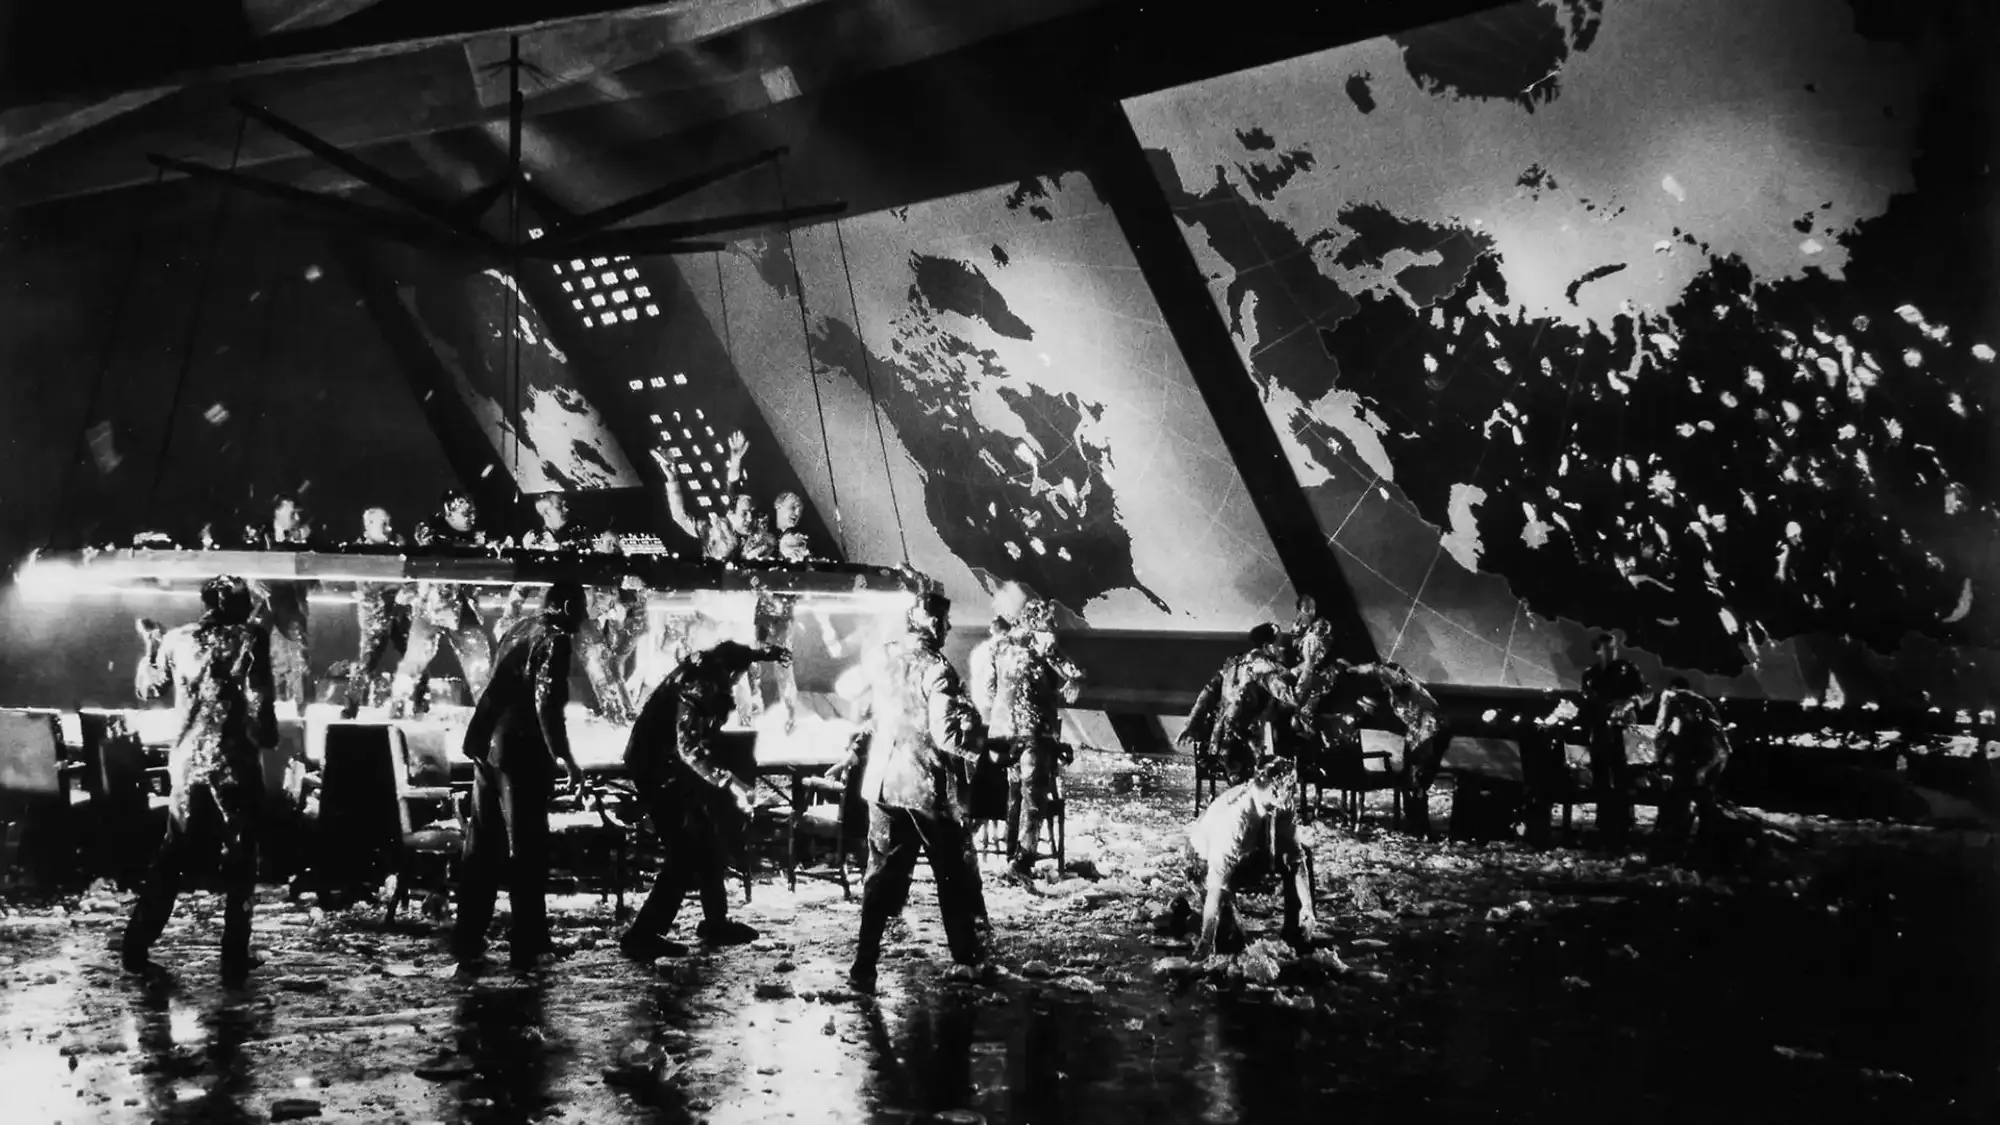 Dr. Strangelove or: How I Learned to Stop Worrying and Love the Bomb movie review